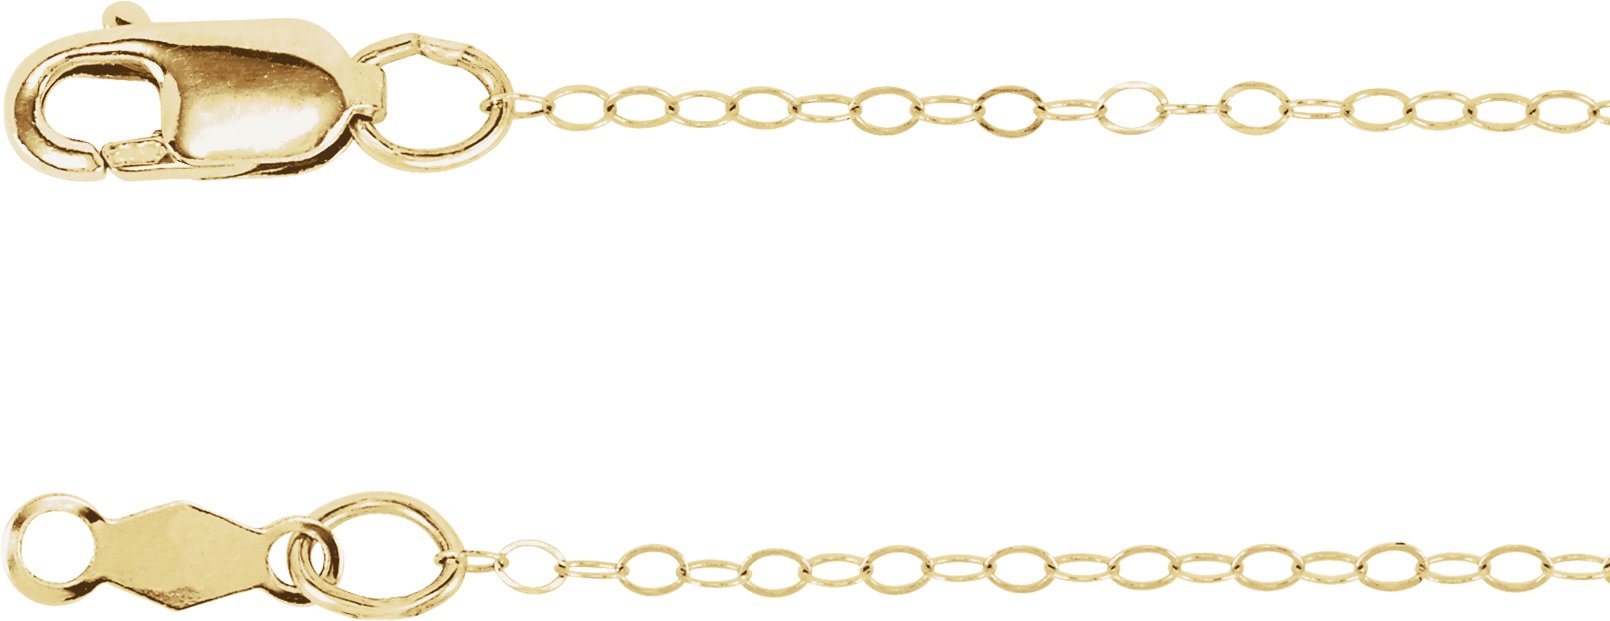 14K Yellow 1 mm Flat Cable 18" Chain